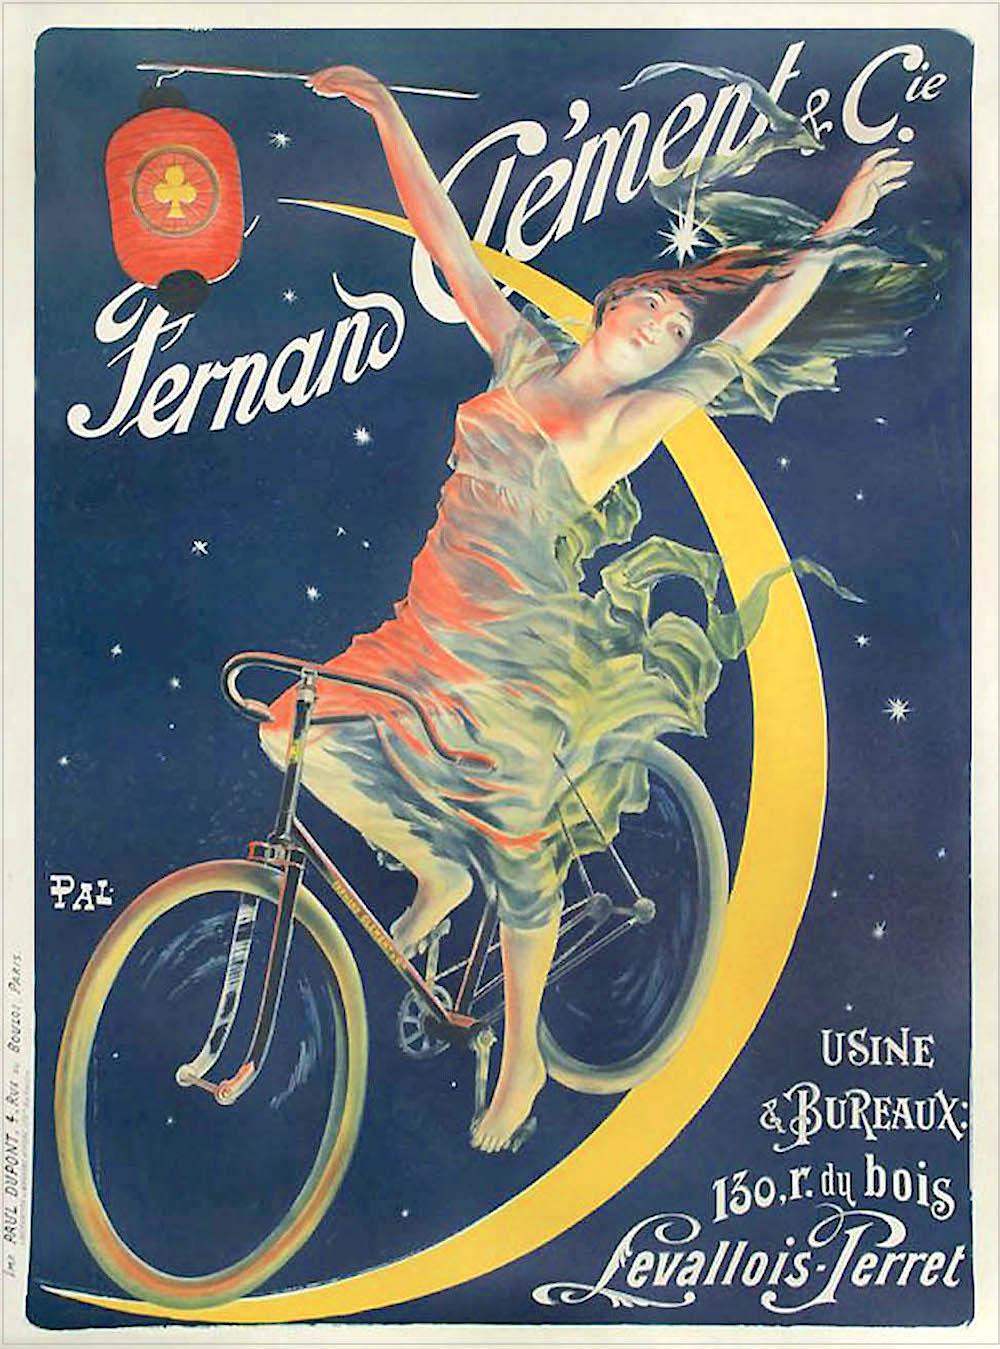 Pal (Jean de Paléologue) Nude Print - CLÉMENT CYCLES Lithograph, Woman on Bicycle, Moon, French Advertising Art 52"